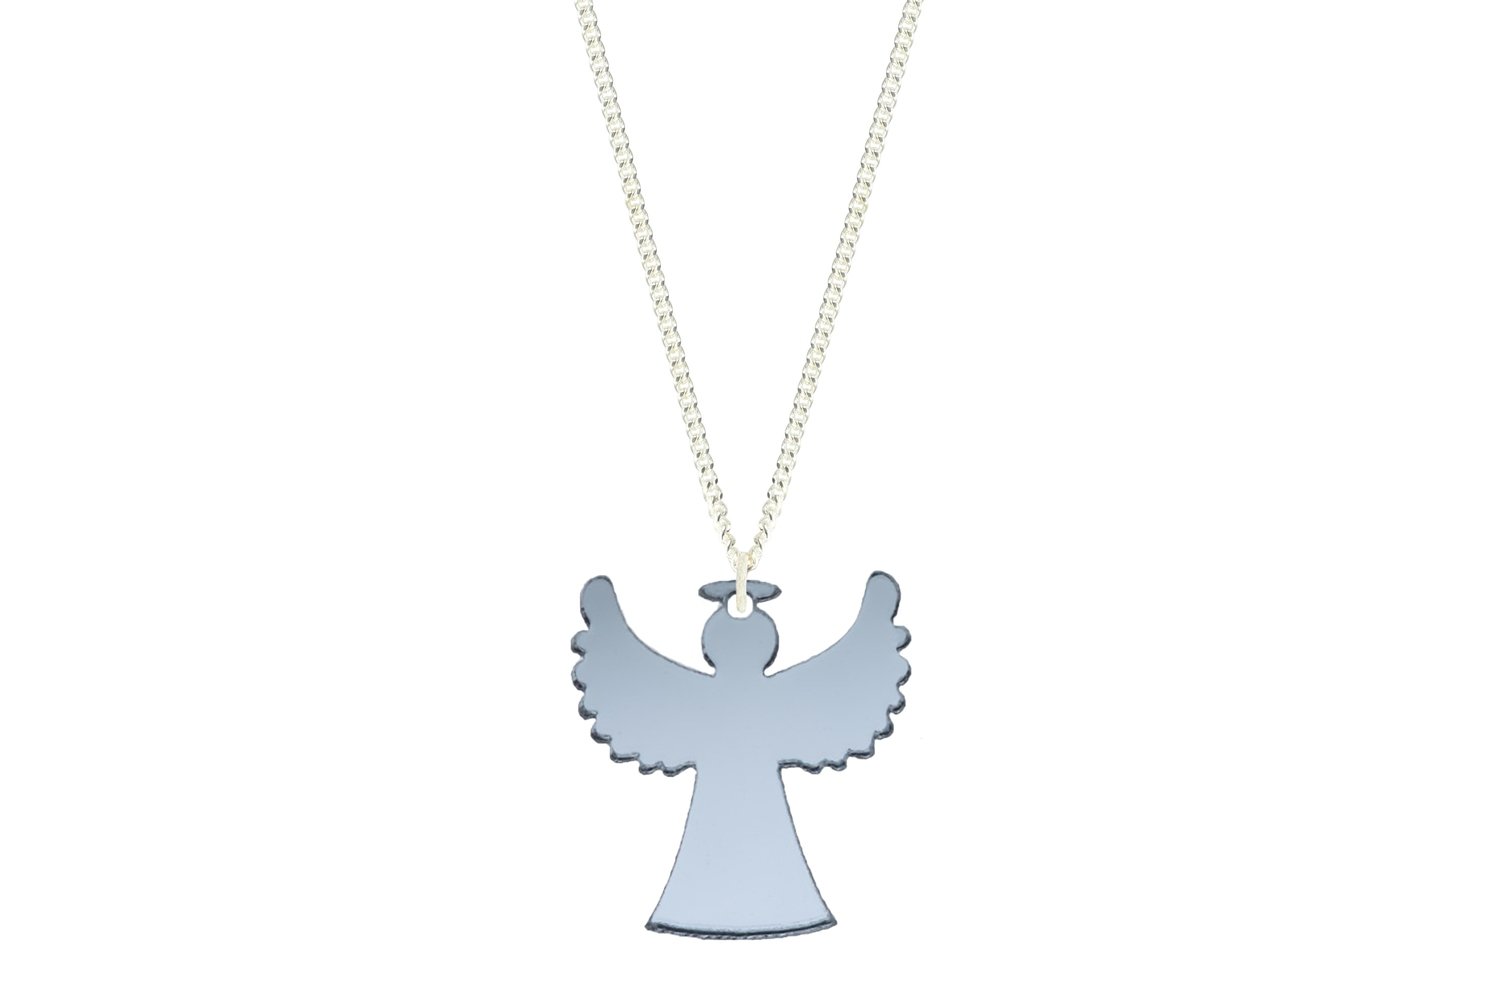 Angel Pendant Sculpted Style on Chain Necklace